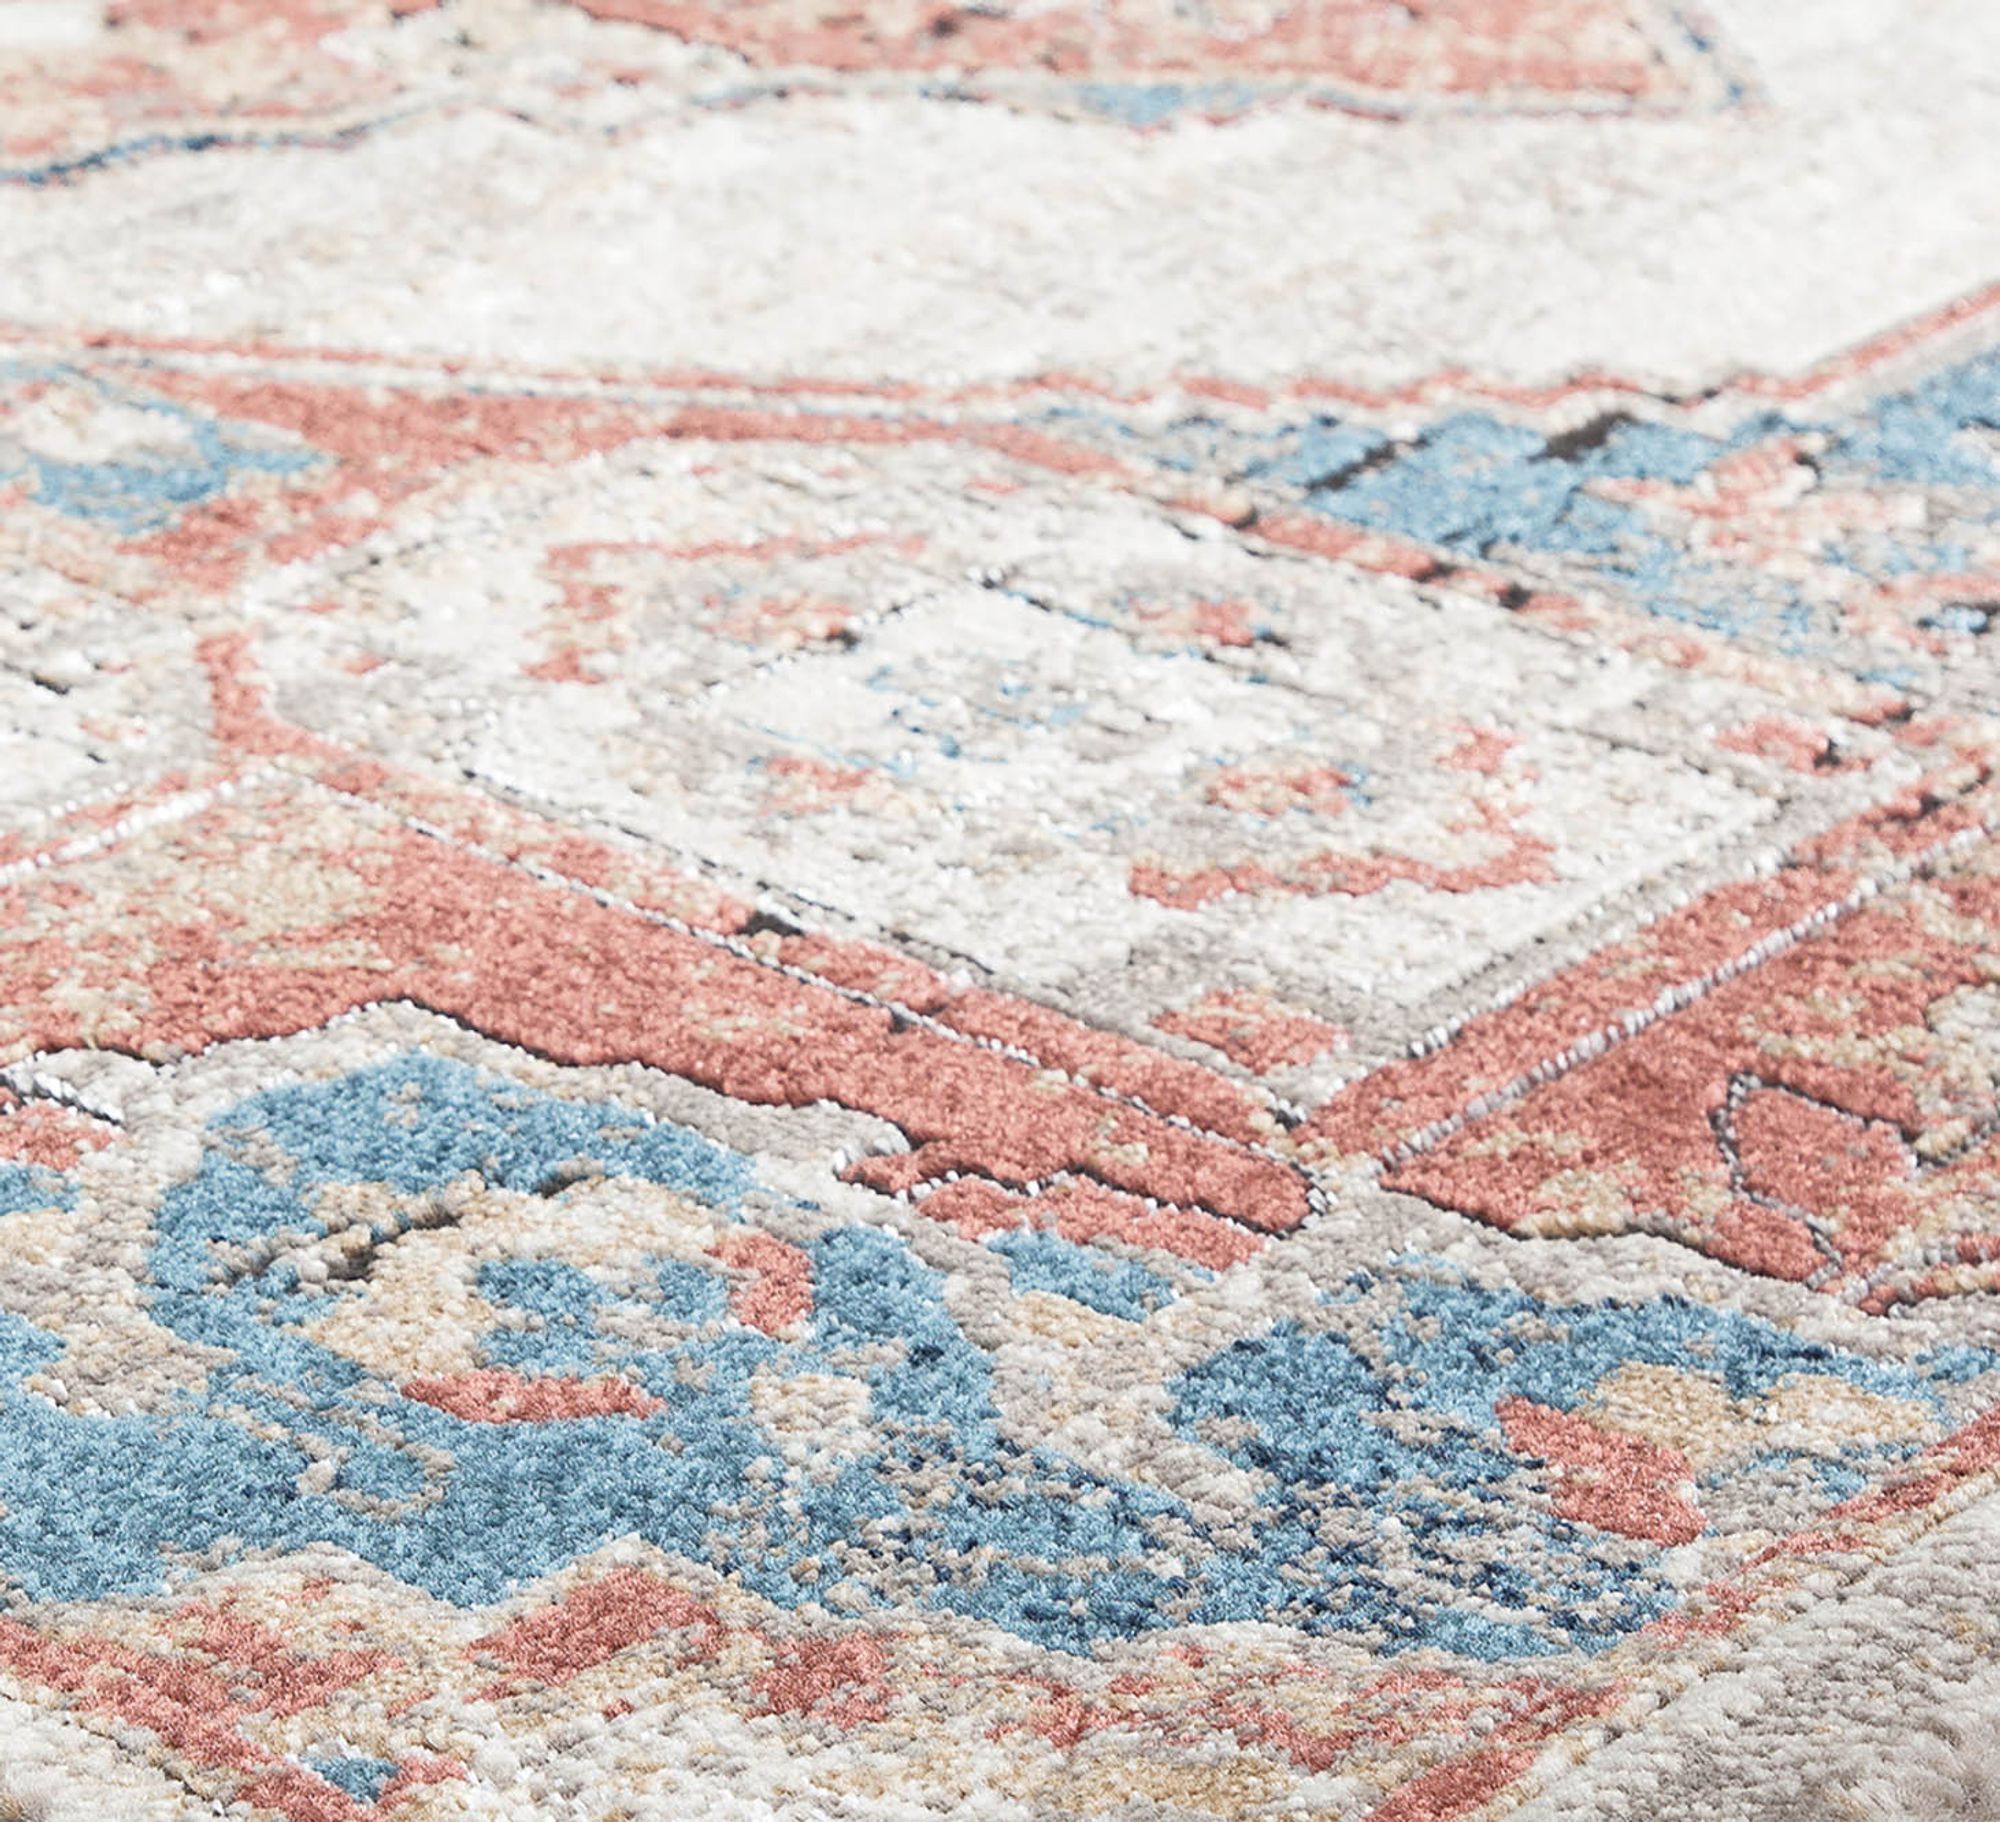 Close-up view of an area rug with a mixed harvest pattern, featuring intricate designs in shades of red, blue, and cream.